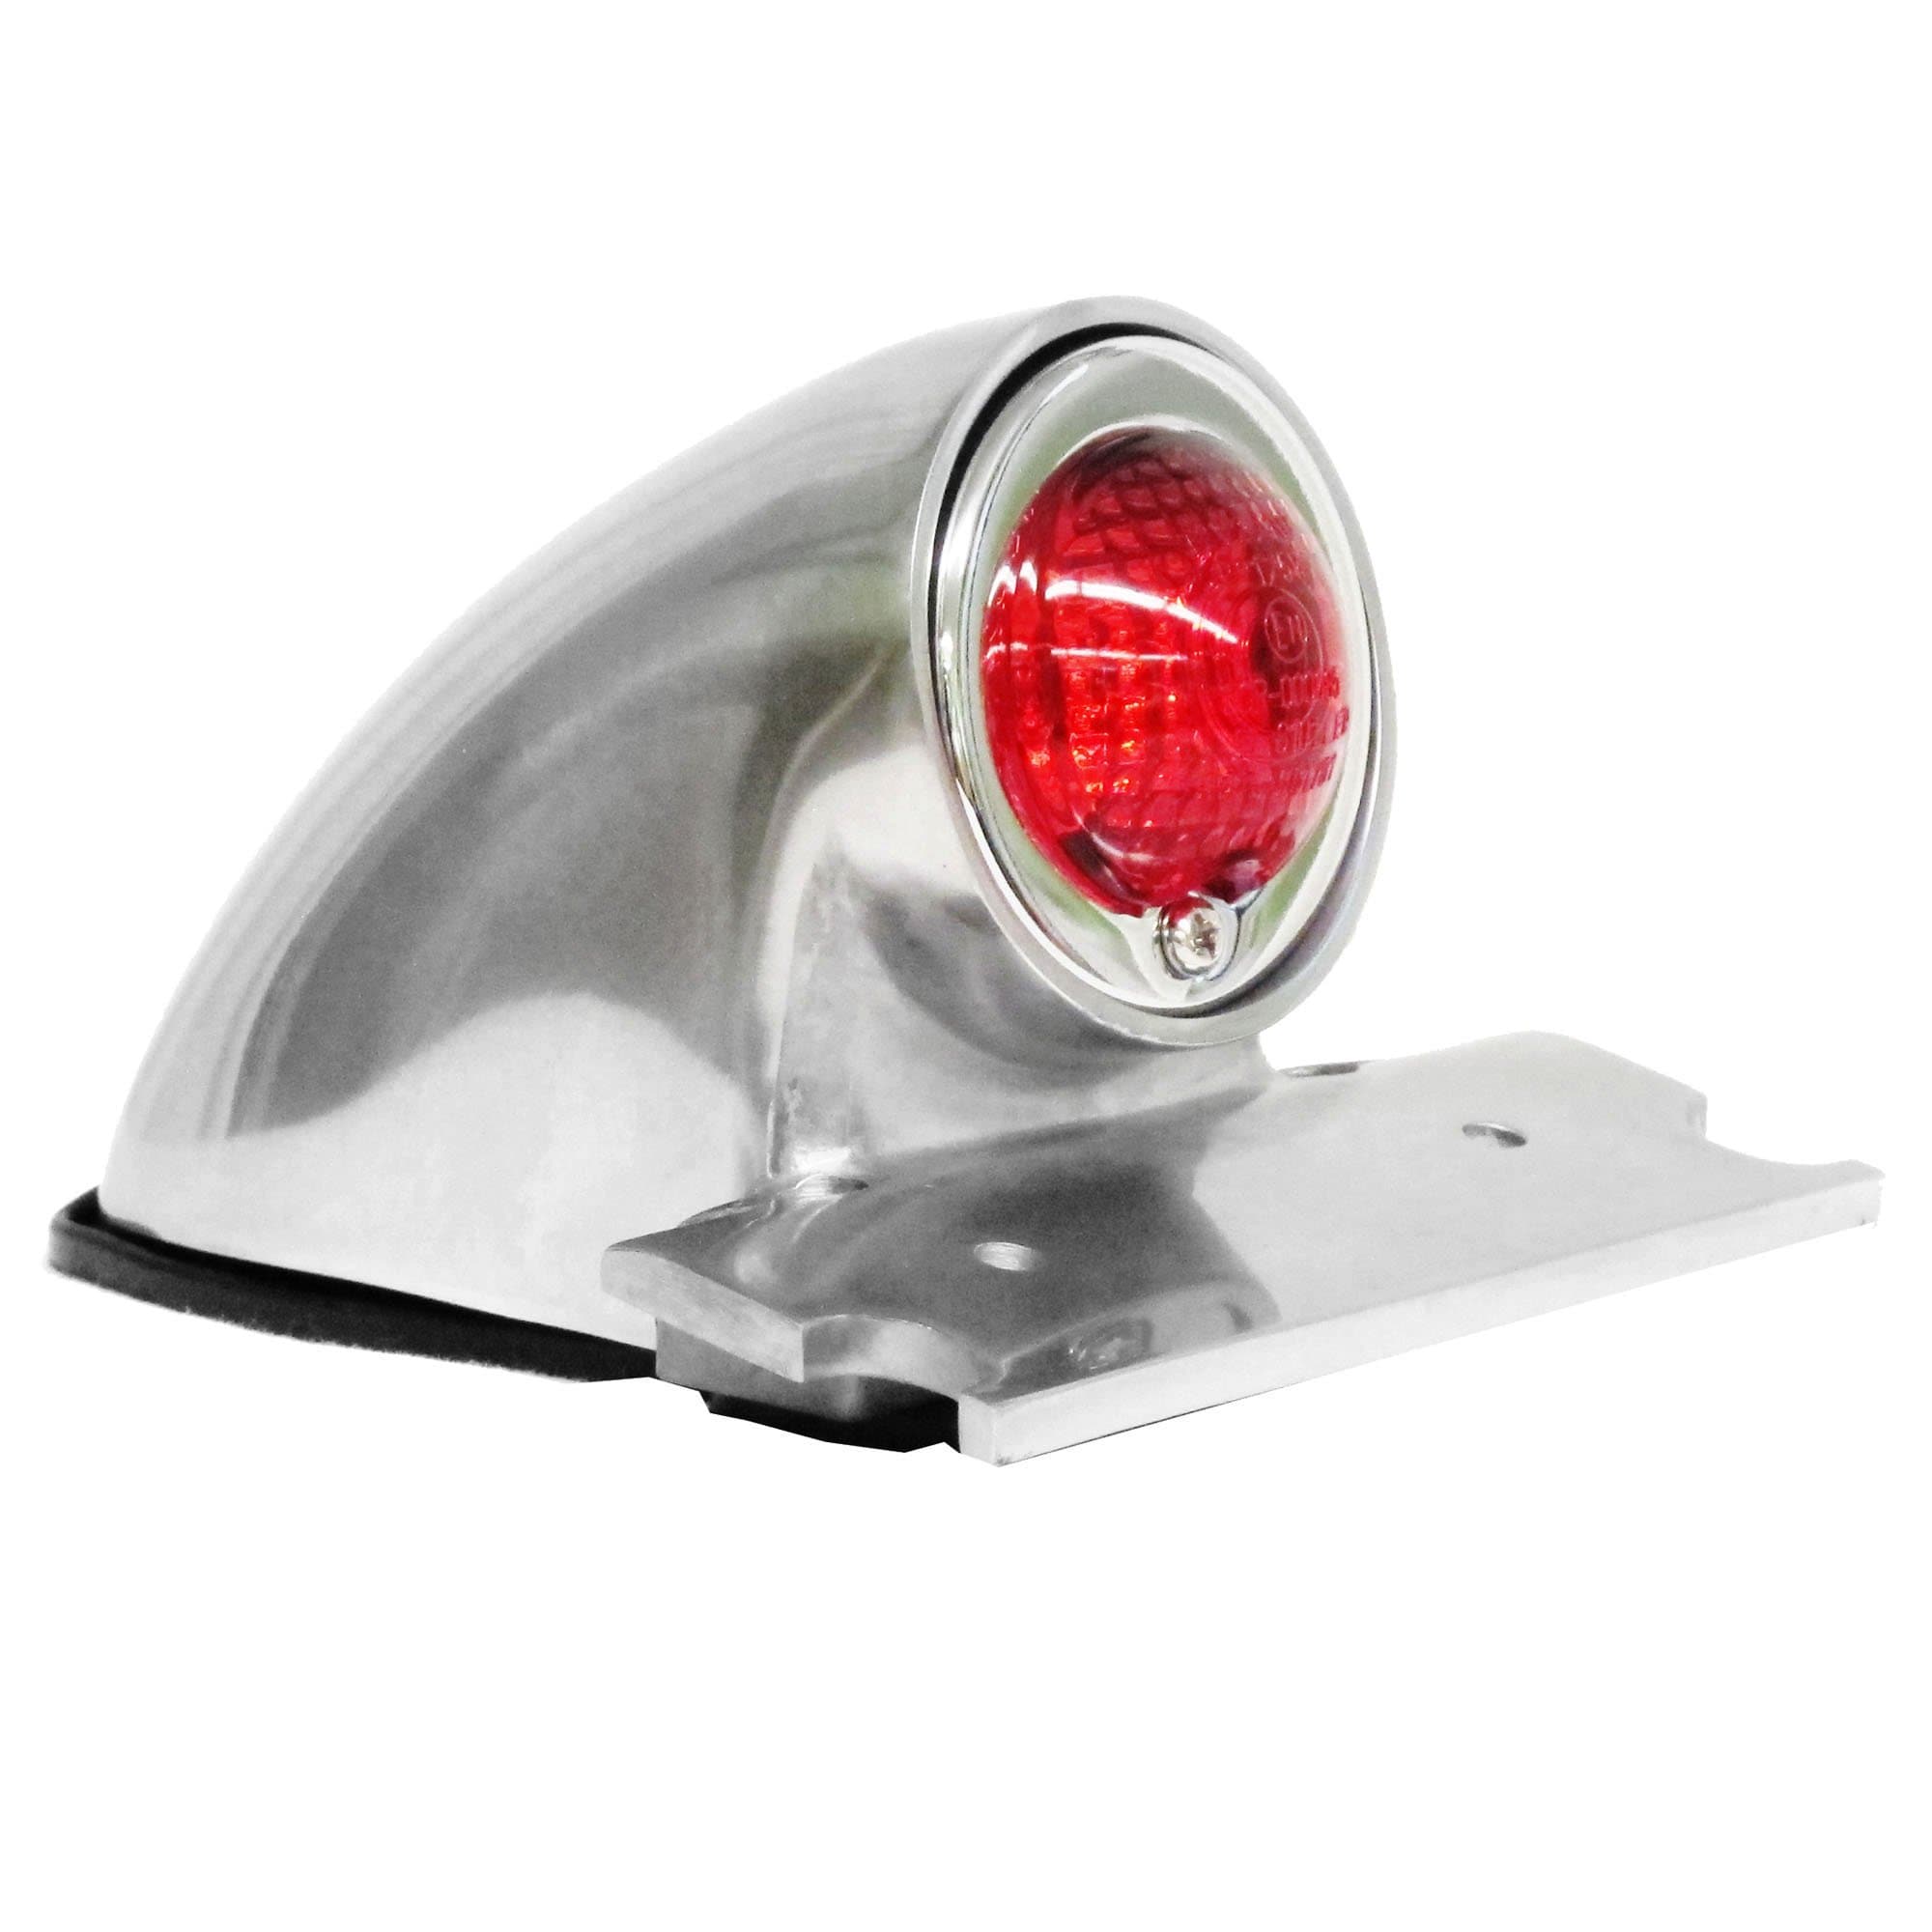 Cycle Standard Sparto Polished Aluminum Tail Light - 12v – Lowbrow